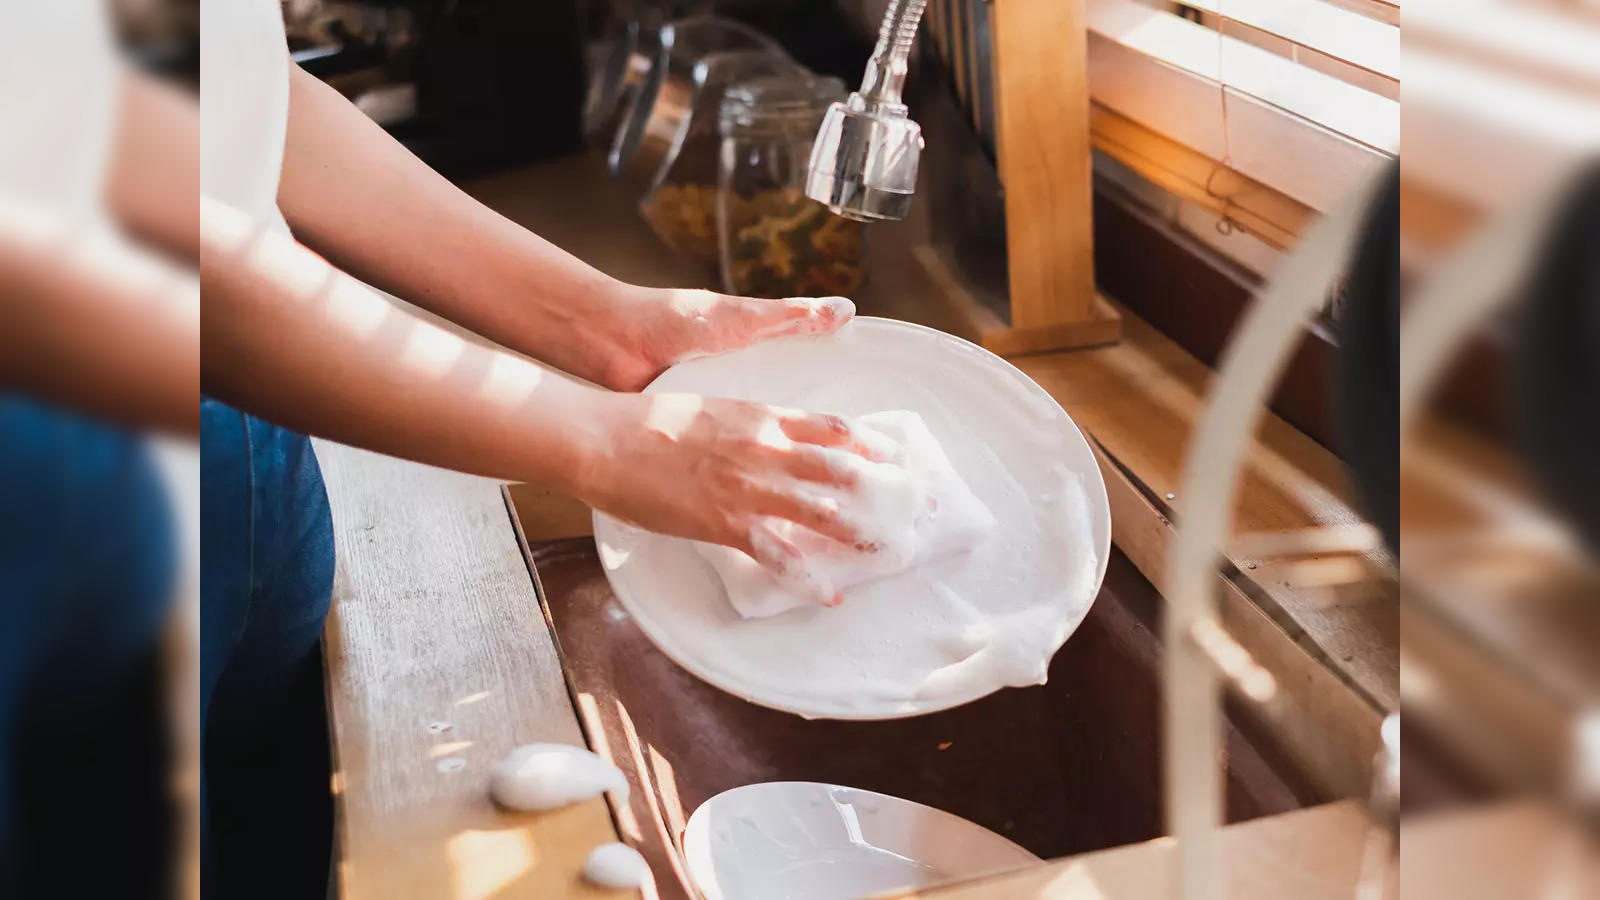 What science knows about our daily dishwashing routine